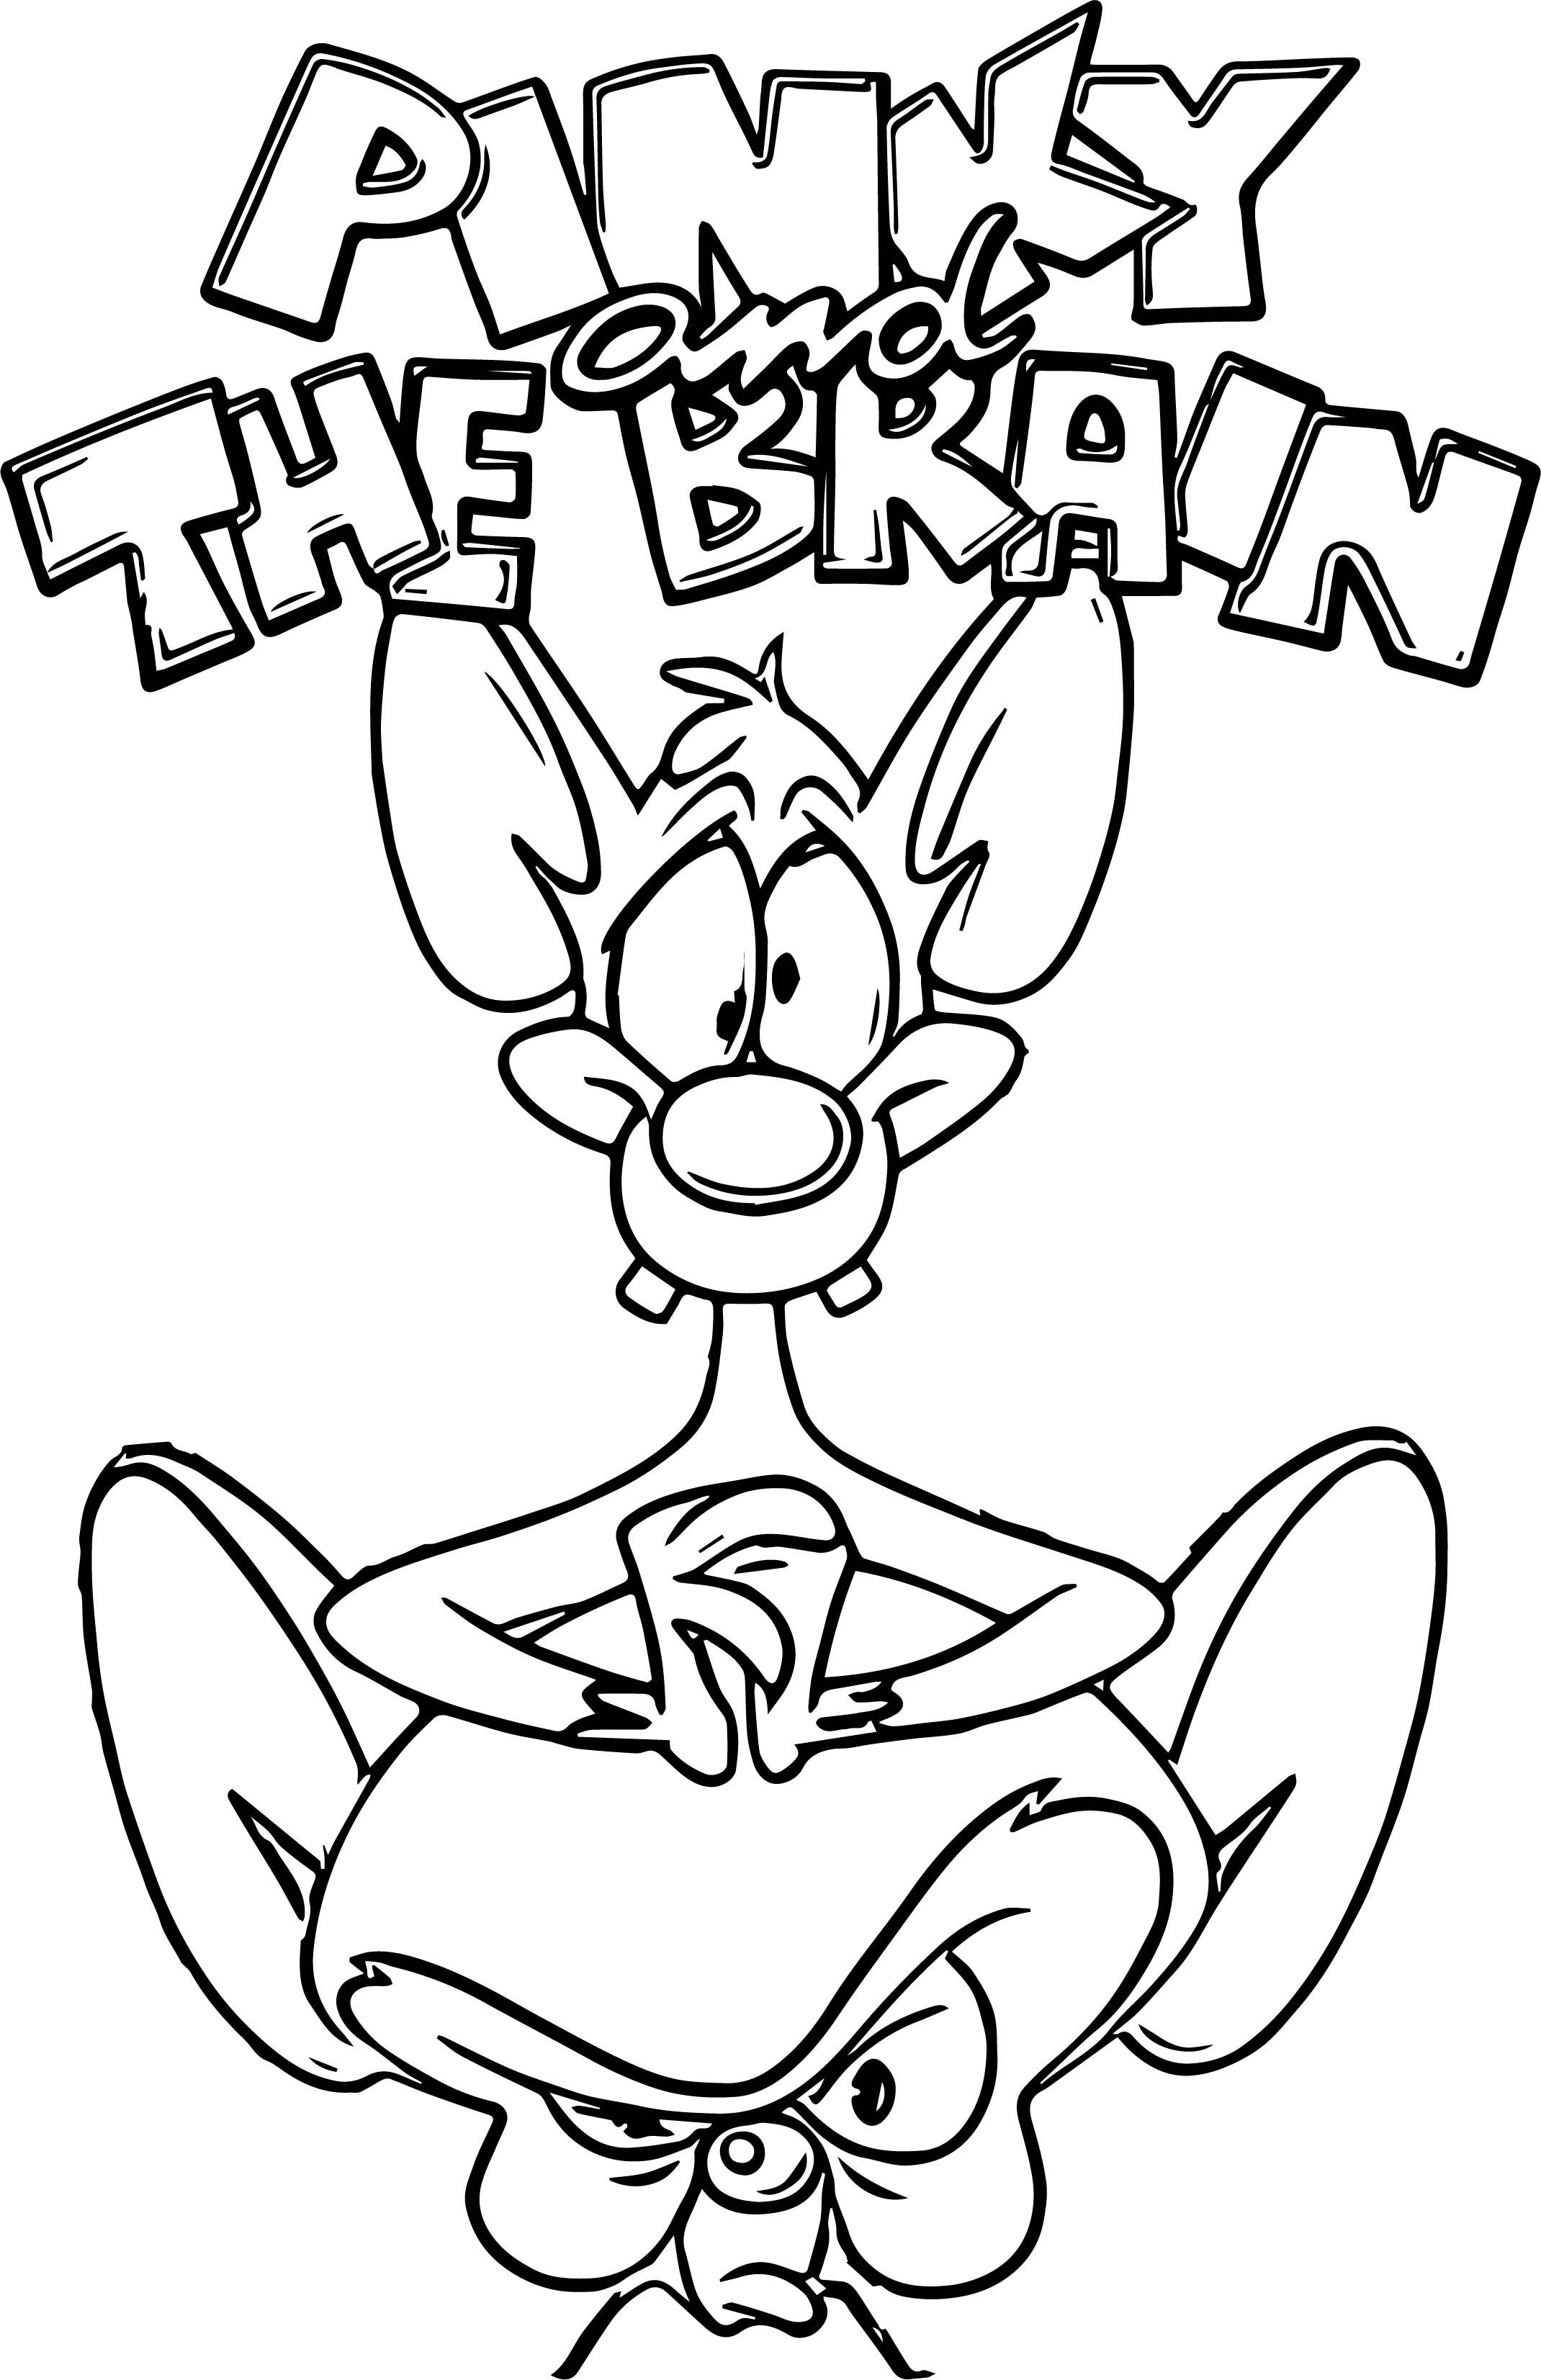 HD wallpaper, 2140X3310 Hd Phone, Mobile Hd Pinky And The Brain Background, Cartoon Characters, Pinky And The Brain Coloring Pages, Kids Activities, Classic Cartoons